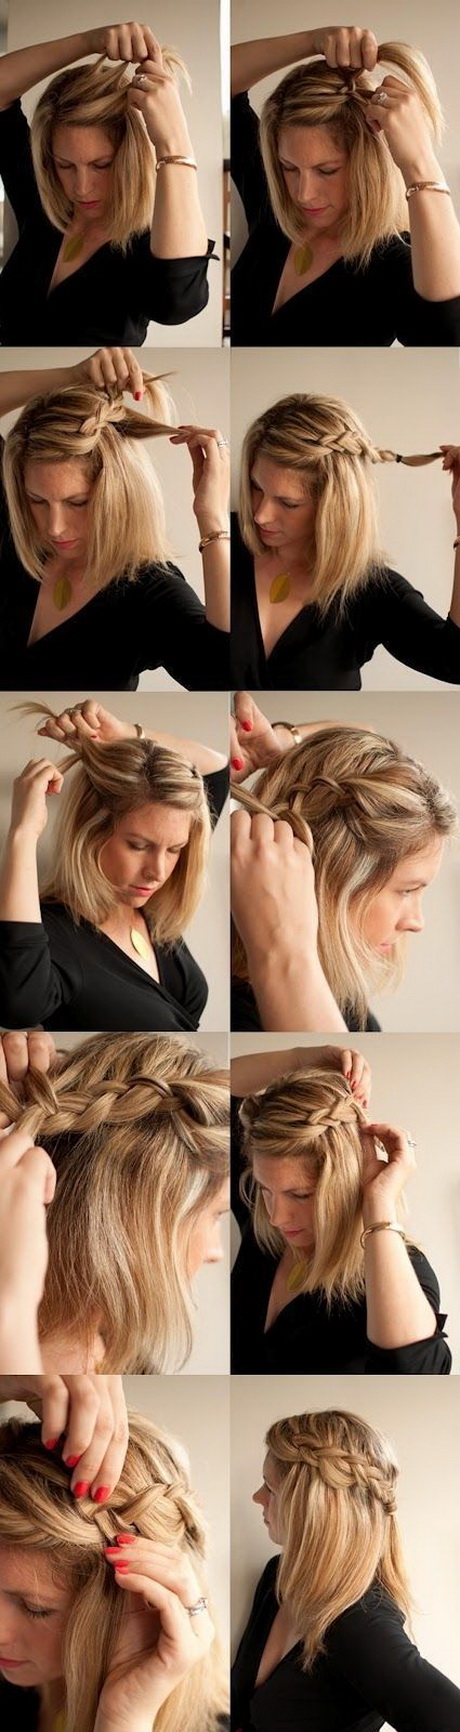 Images of hairstyles for girls